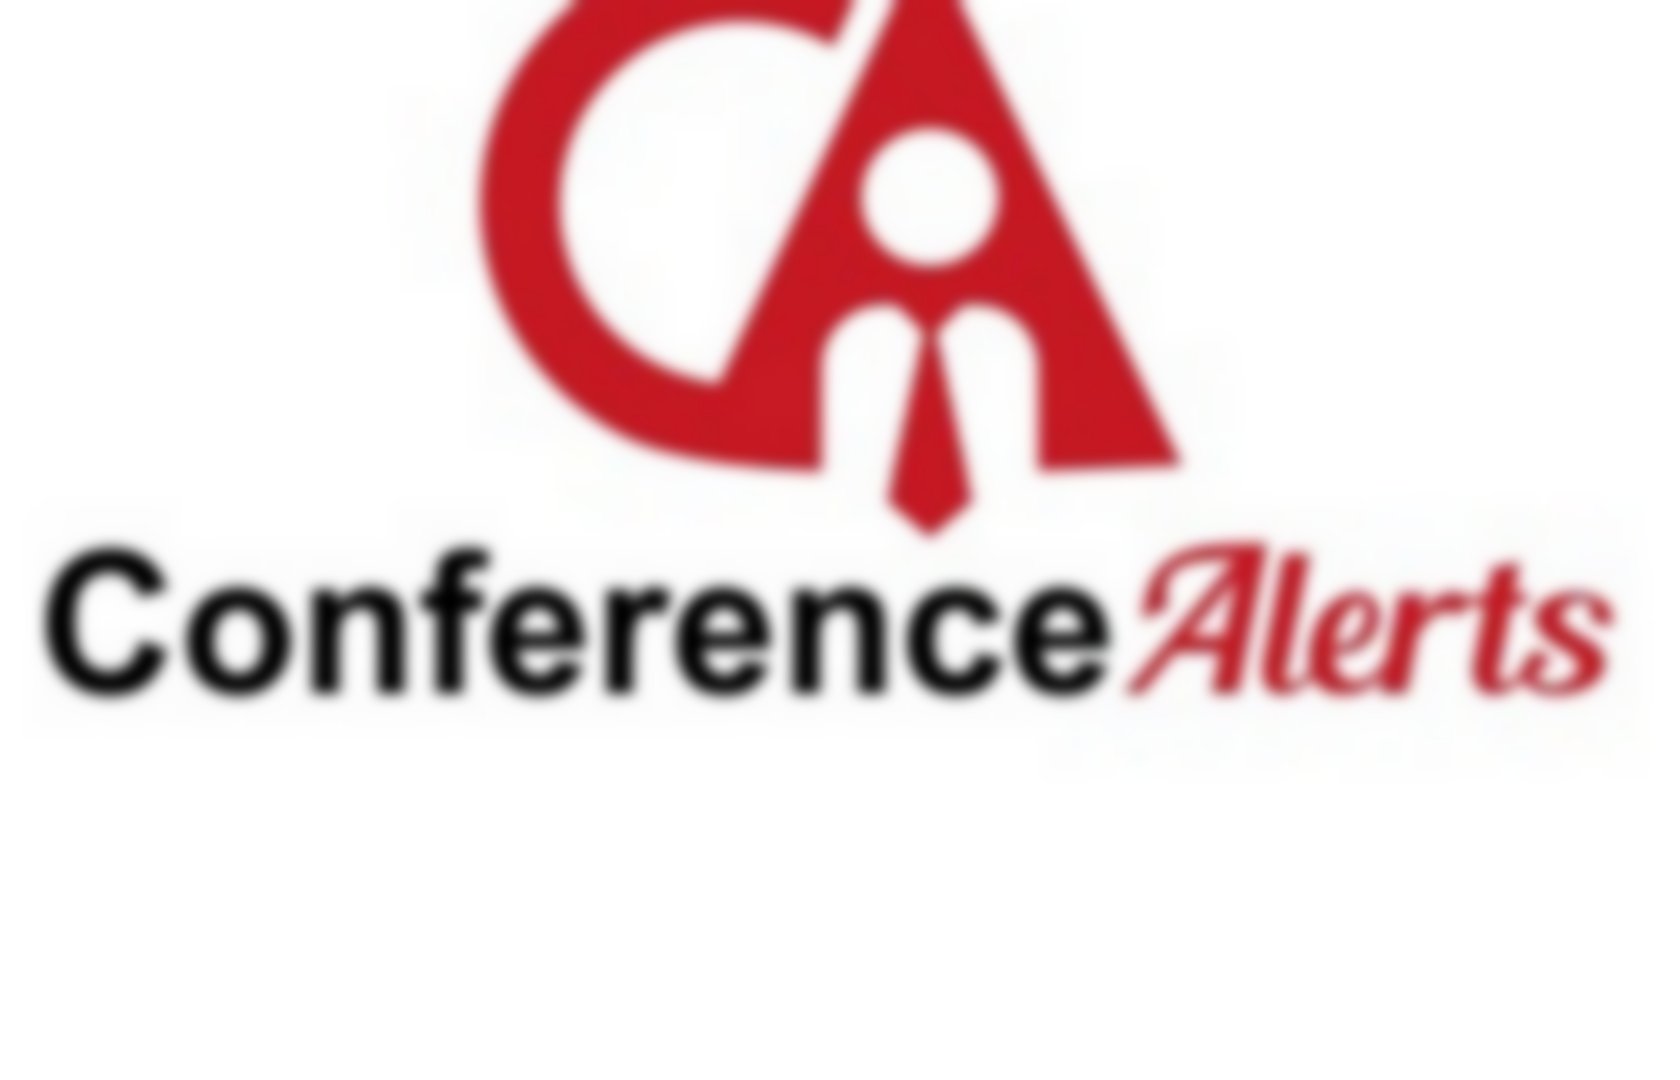 Conference Alerts (conferences2019) Pearltrees